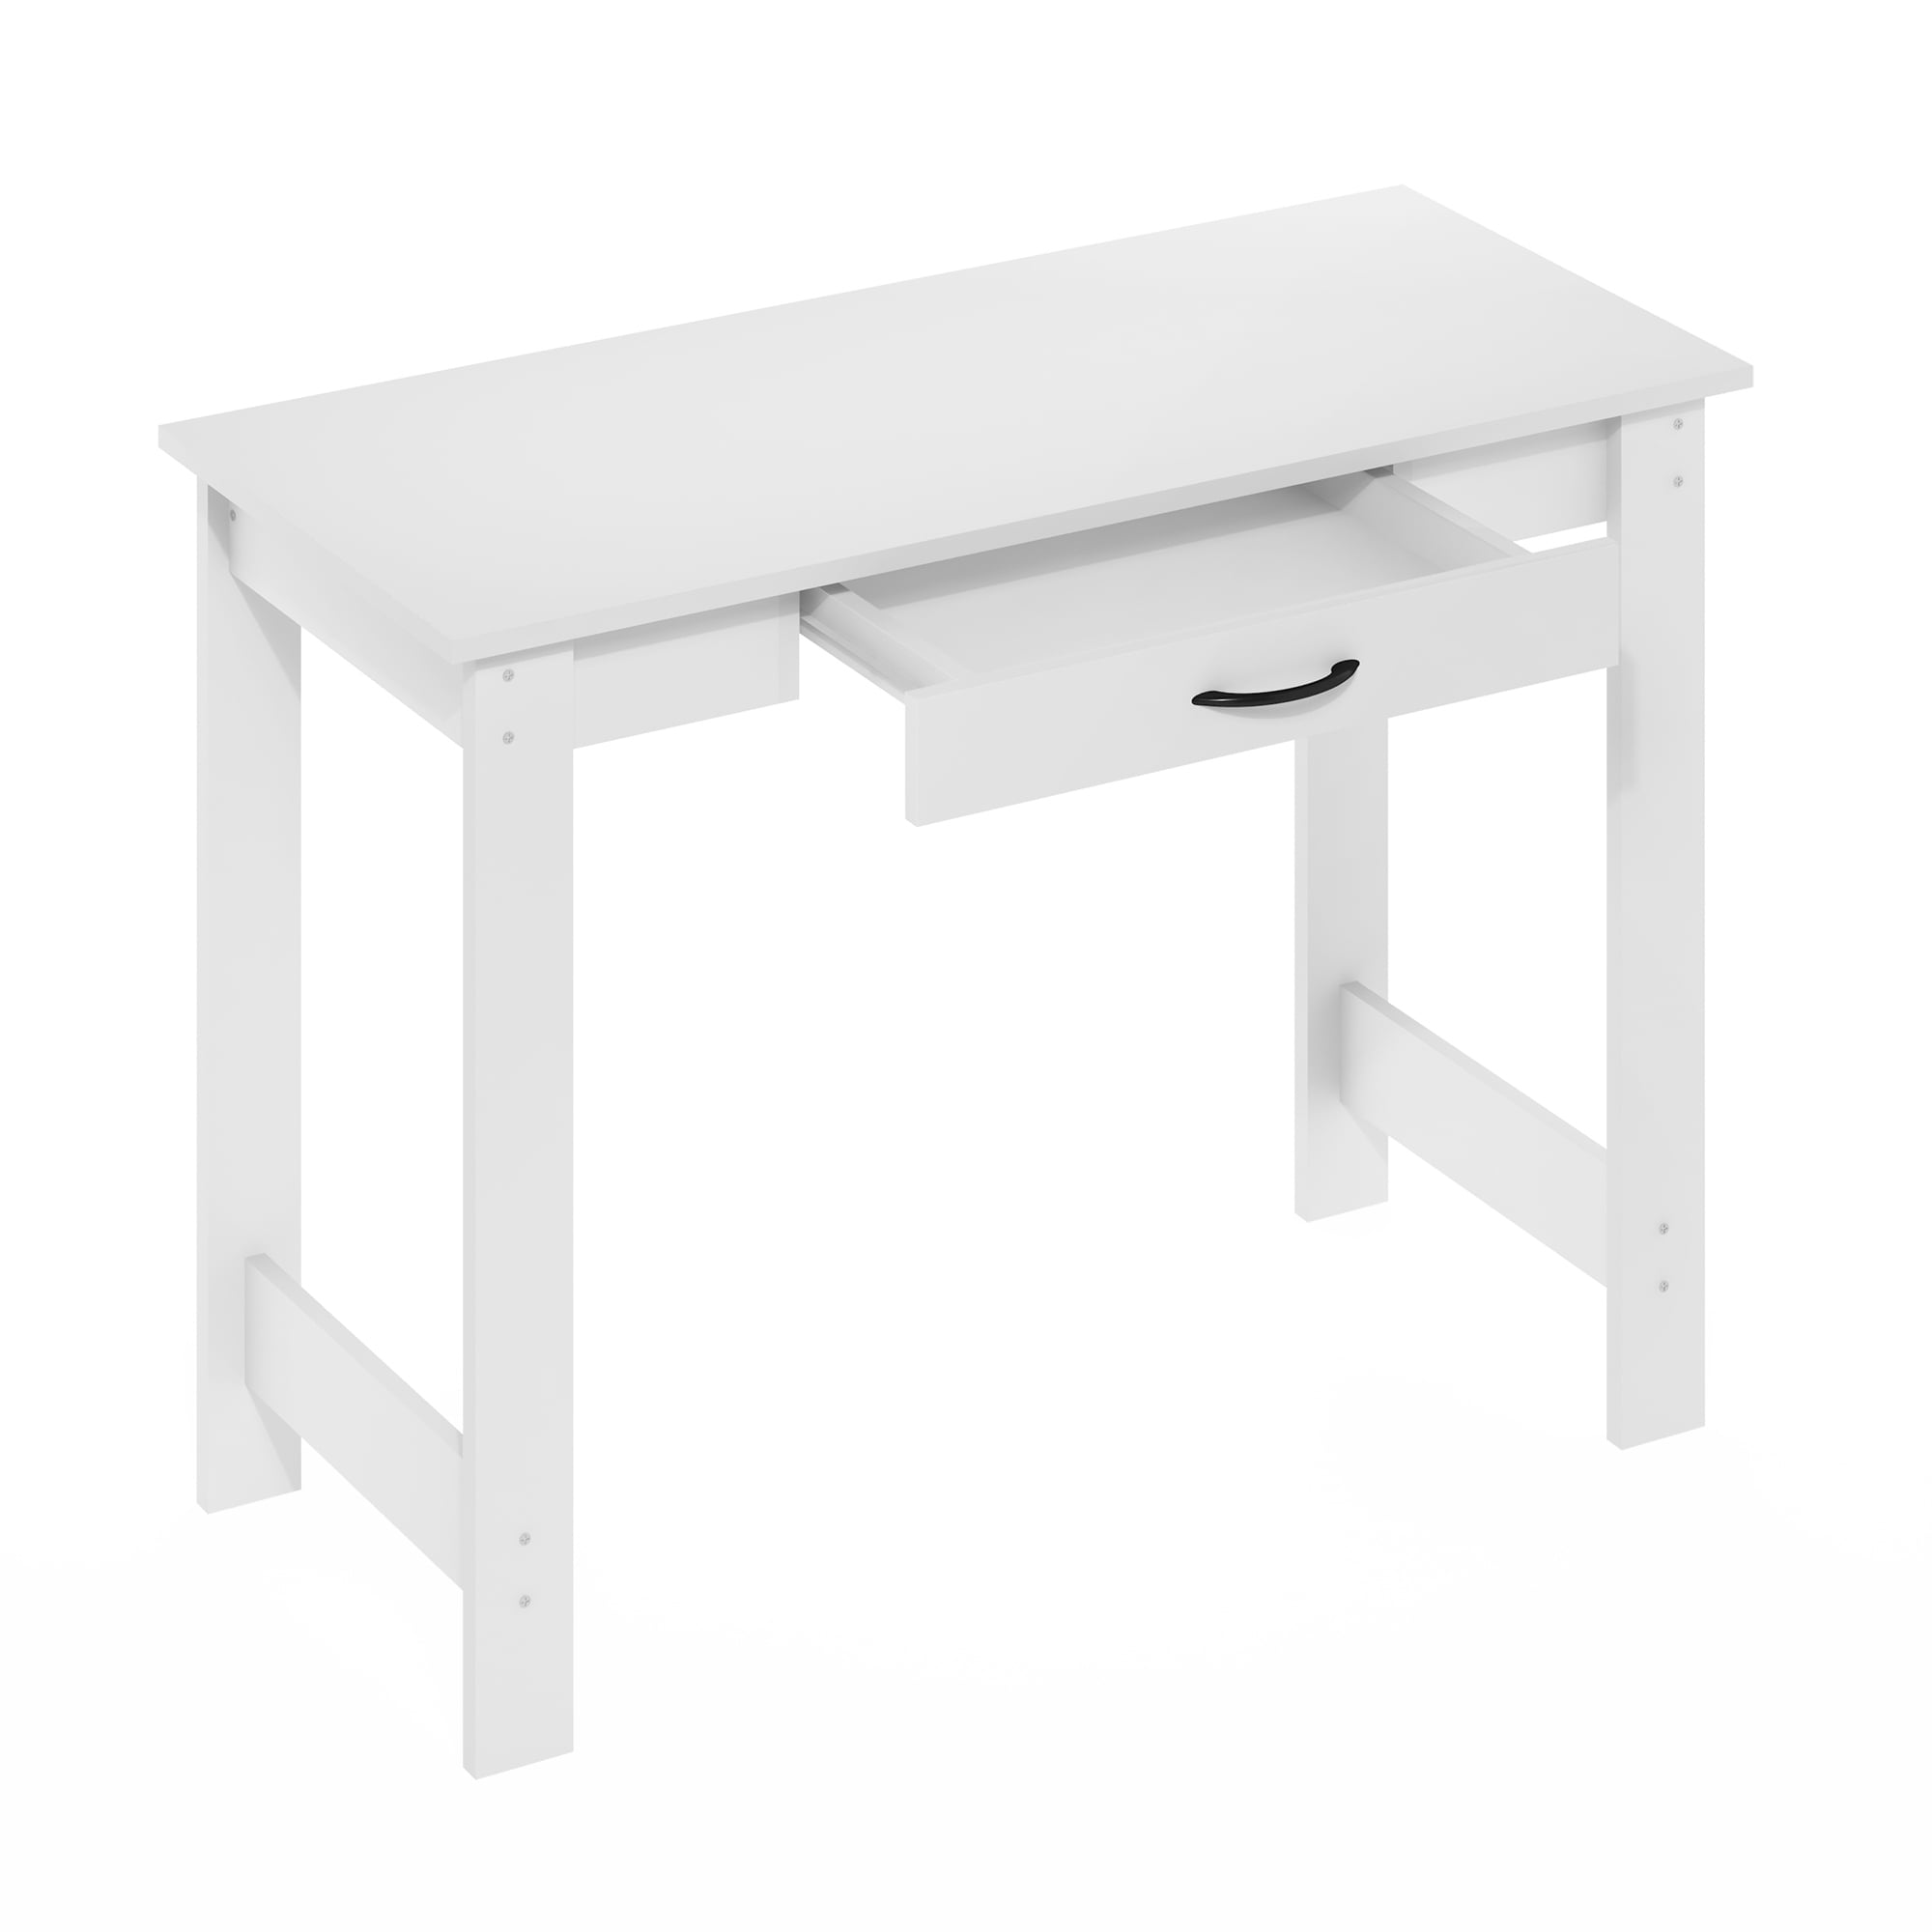 Furinno JAYA Computer Study Desk with Drawer – Furinno – Fits Your